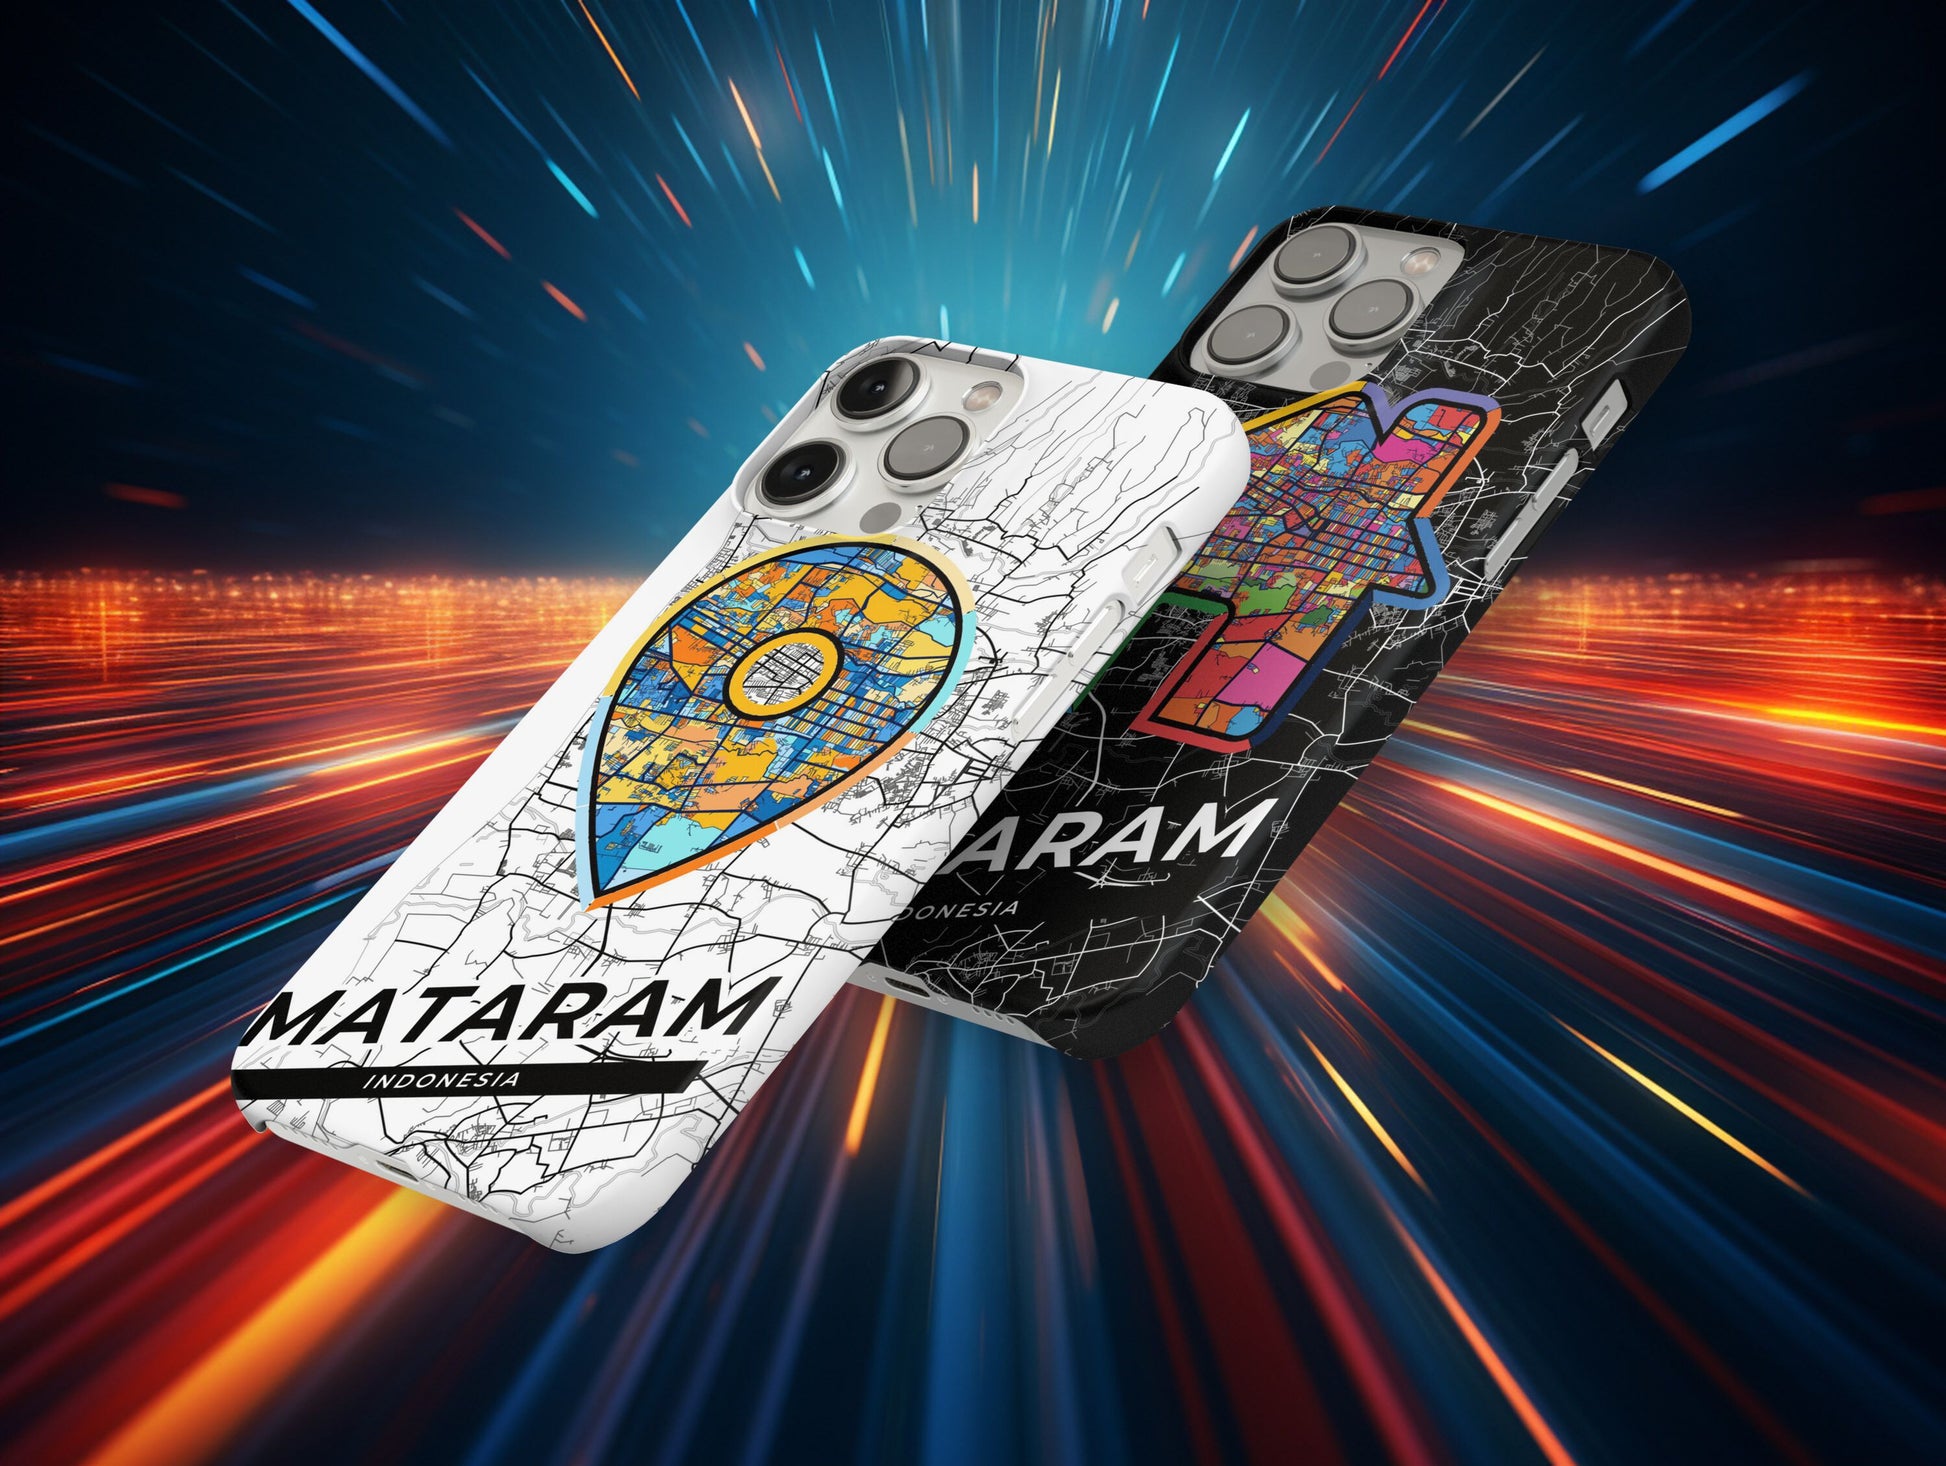 Mataram Indonesia slim phone case with colorful icon. Birthday, wedding or housewarming gift. Couple match cases.